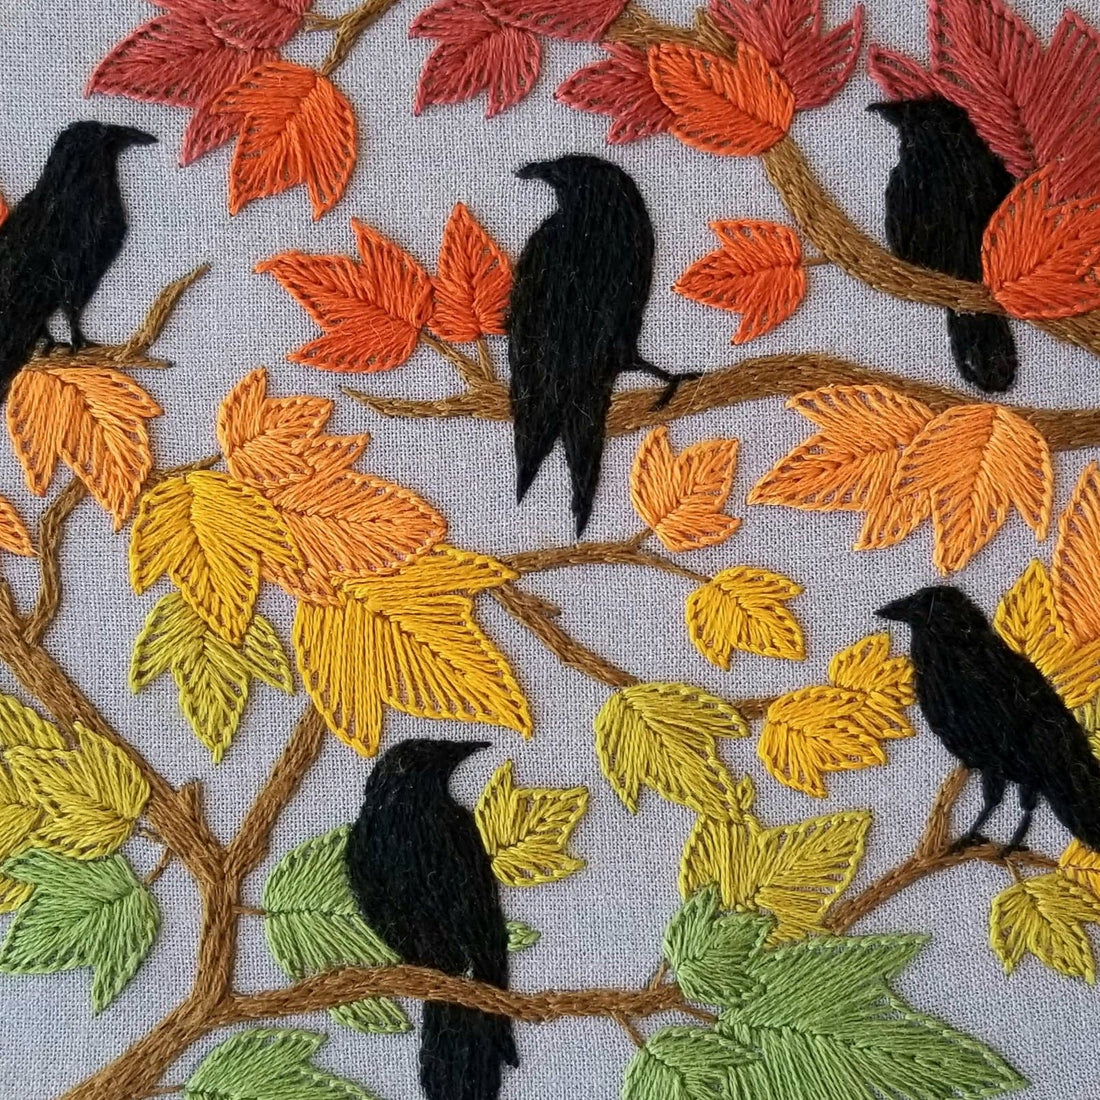 Autumn Birds Embroidery Kit - Jessica Long Embroidery